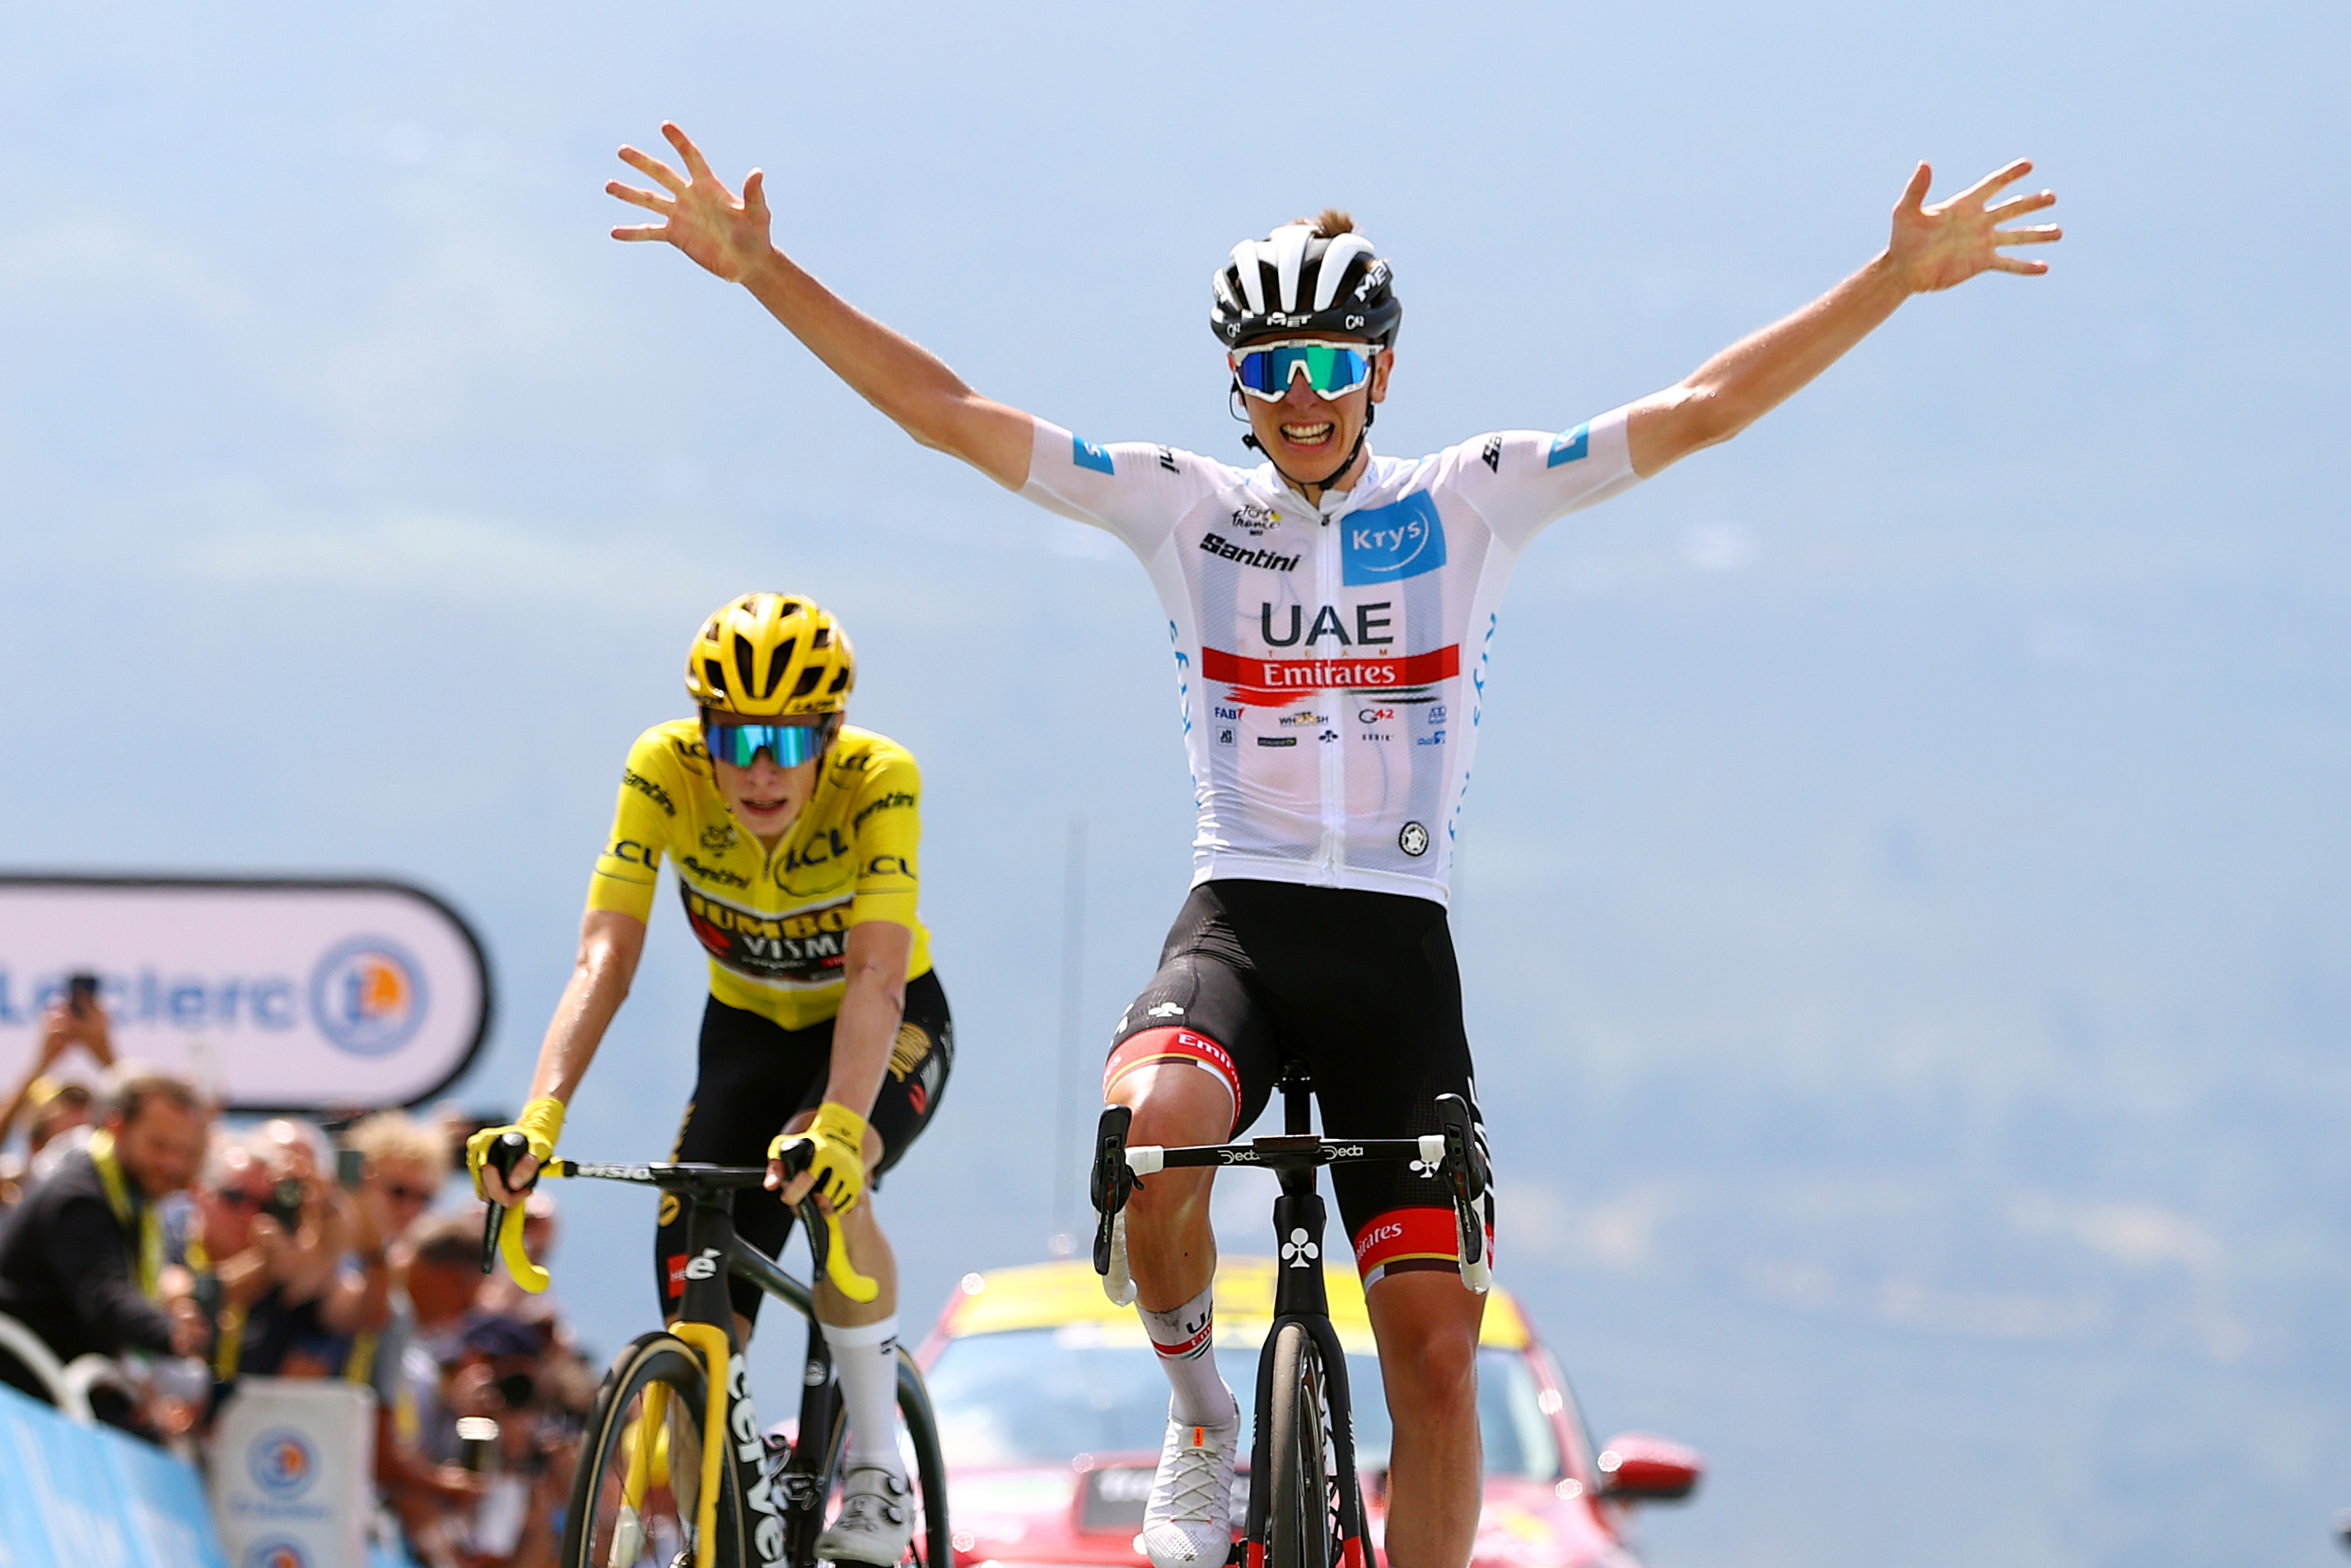 Tadej Pogacar of Slovenia and UAE Team Emirates - White Best Young Rider Jersey celebrates at finish line as stage winner ahead of Jonas Vingegaard Rasmussen of Denmark and Team Jumbo - Visma - Yellow Leader Jersey during the 109th Tour de France 2022, Stage 17 a 129,7km stage from Saint-Gaudens to Peyragudes 1580m / #TDF2022 / #WorldTour / on July 20, 2022 in Peyragudes, France.